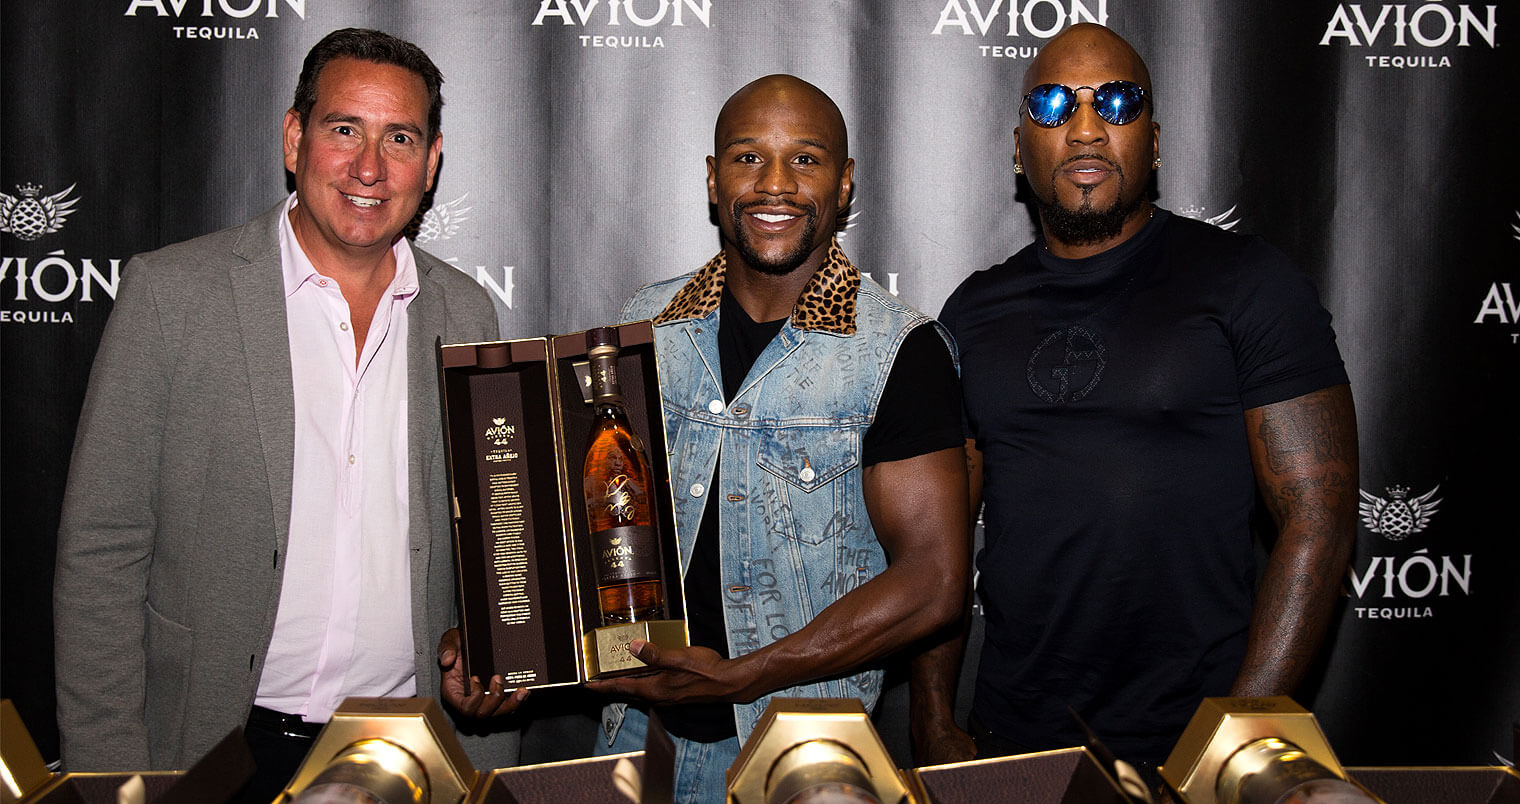 Tequila Avión Celebrates Floyd Mayweather Jr. with Limited Edition Bottle, featured image